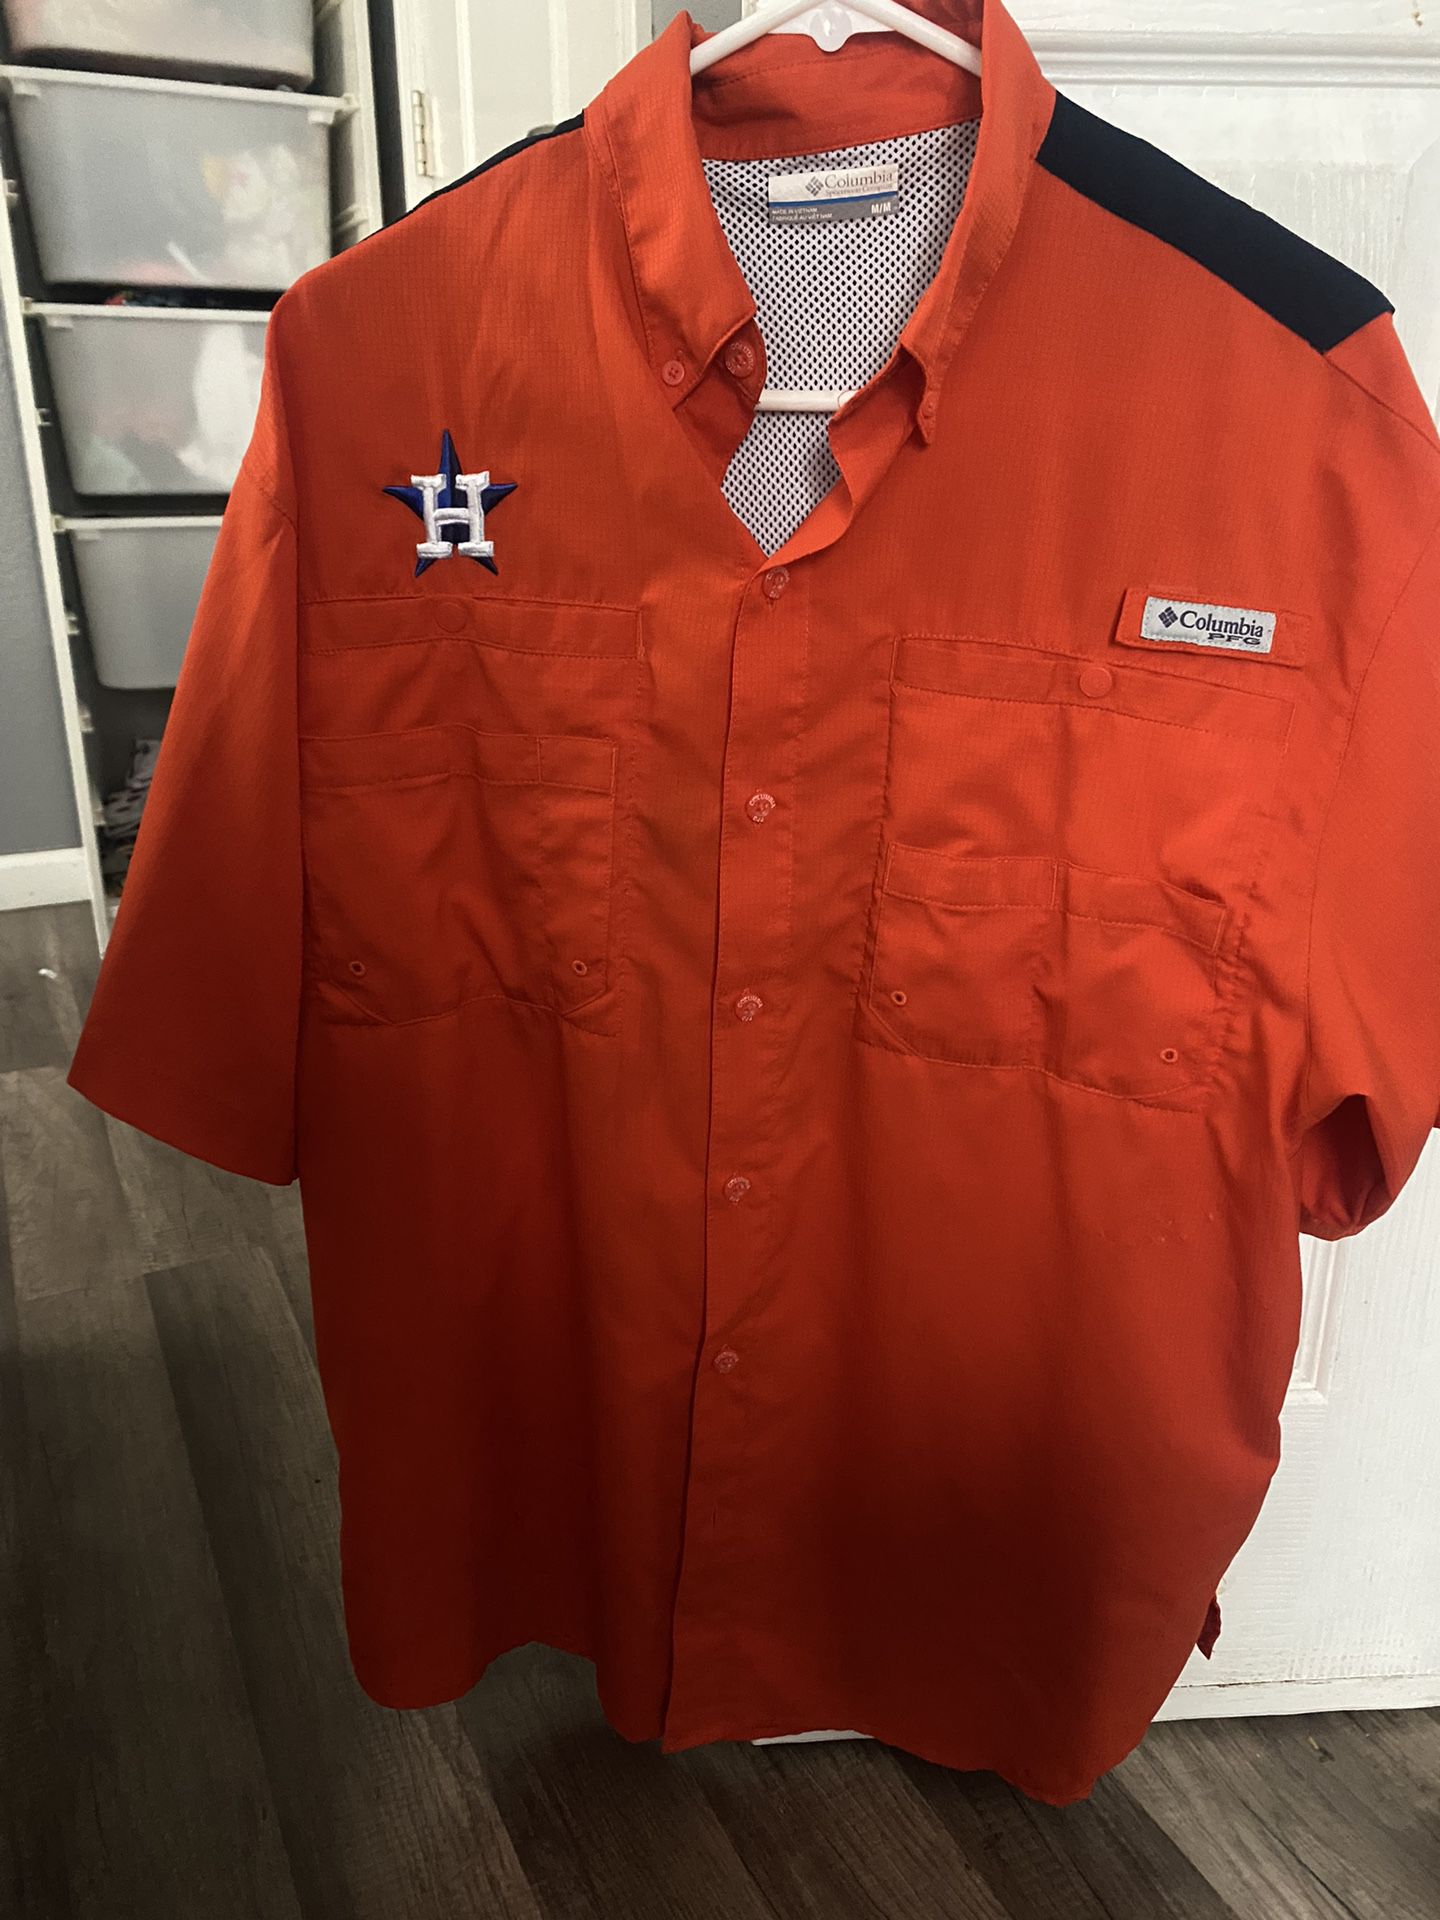 Houston Astros Columbia Fishing Shirt for Sale in Houston, TX - OfferUp